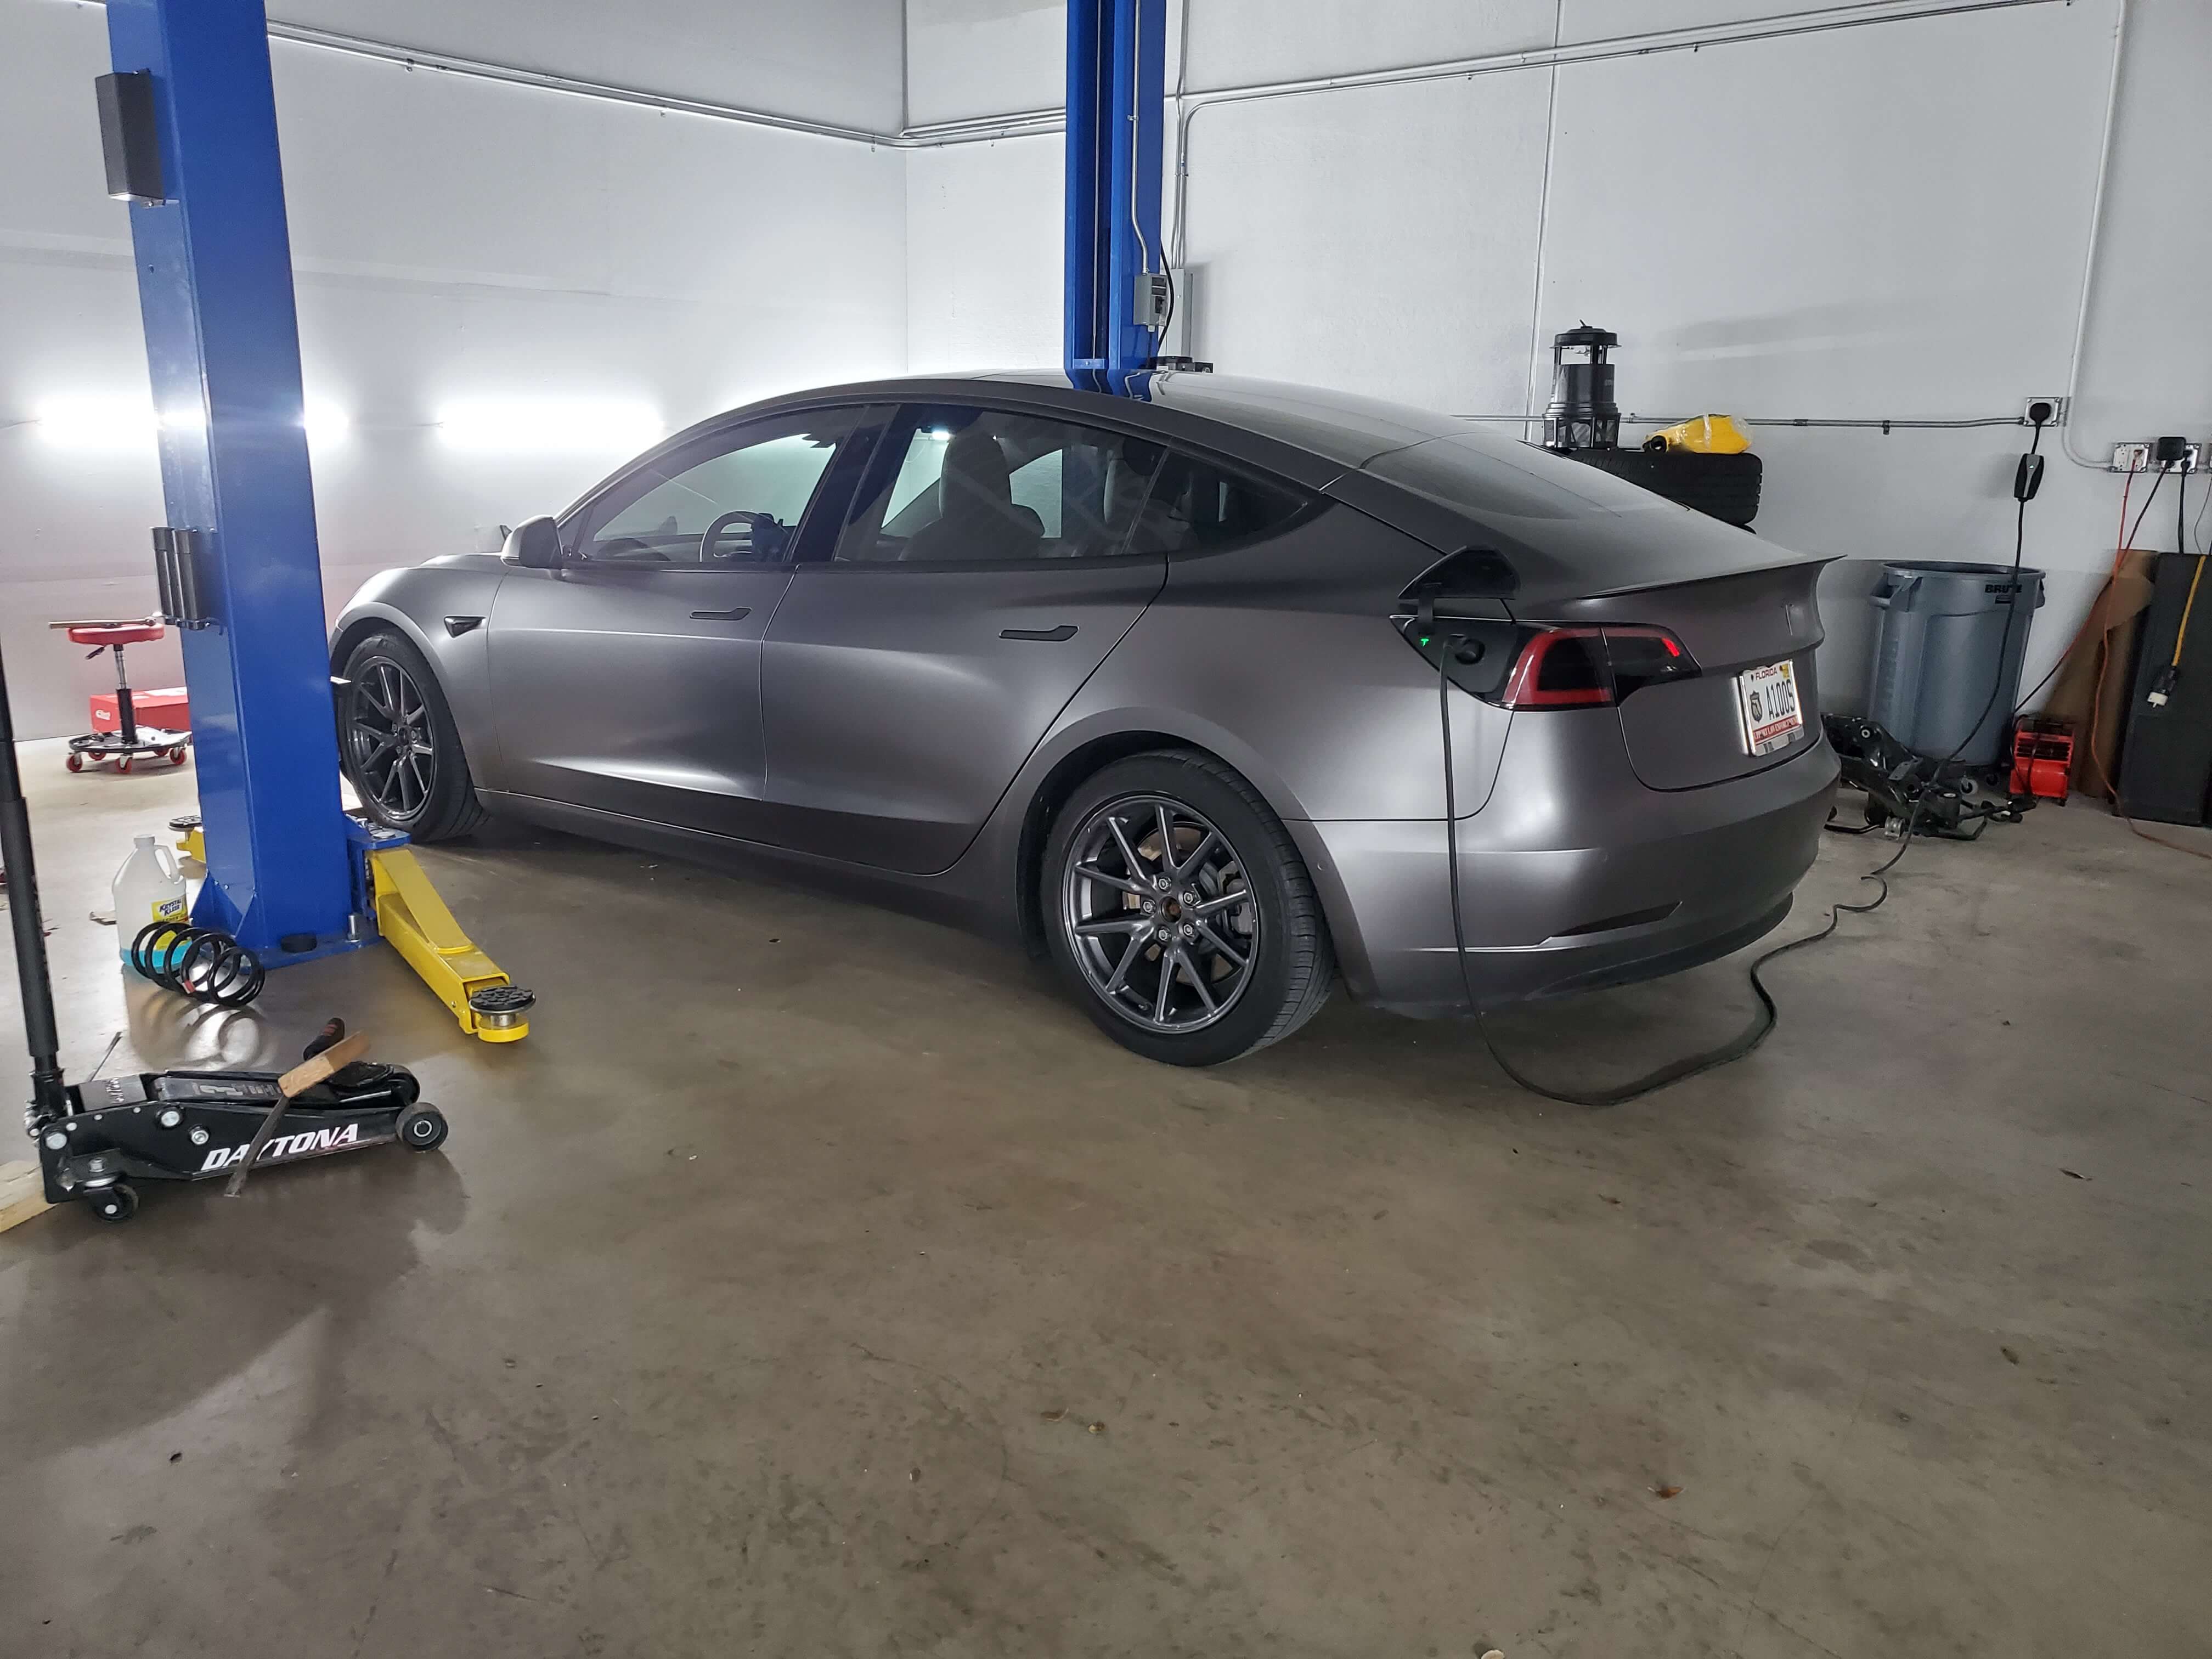 electric vehicle being charged at repair shop